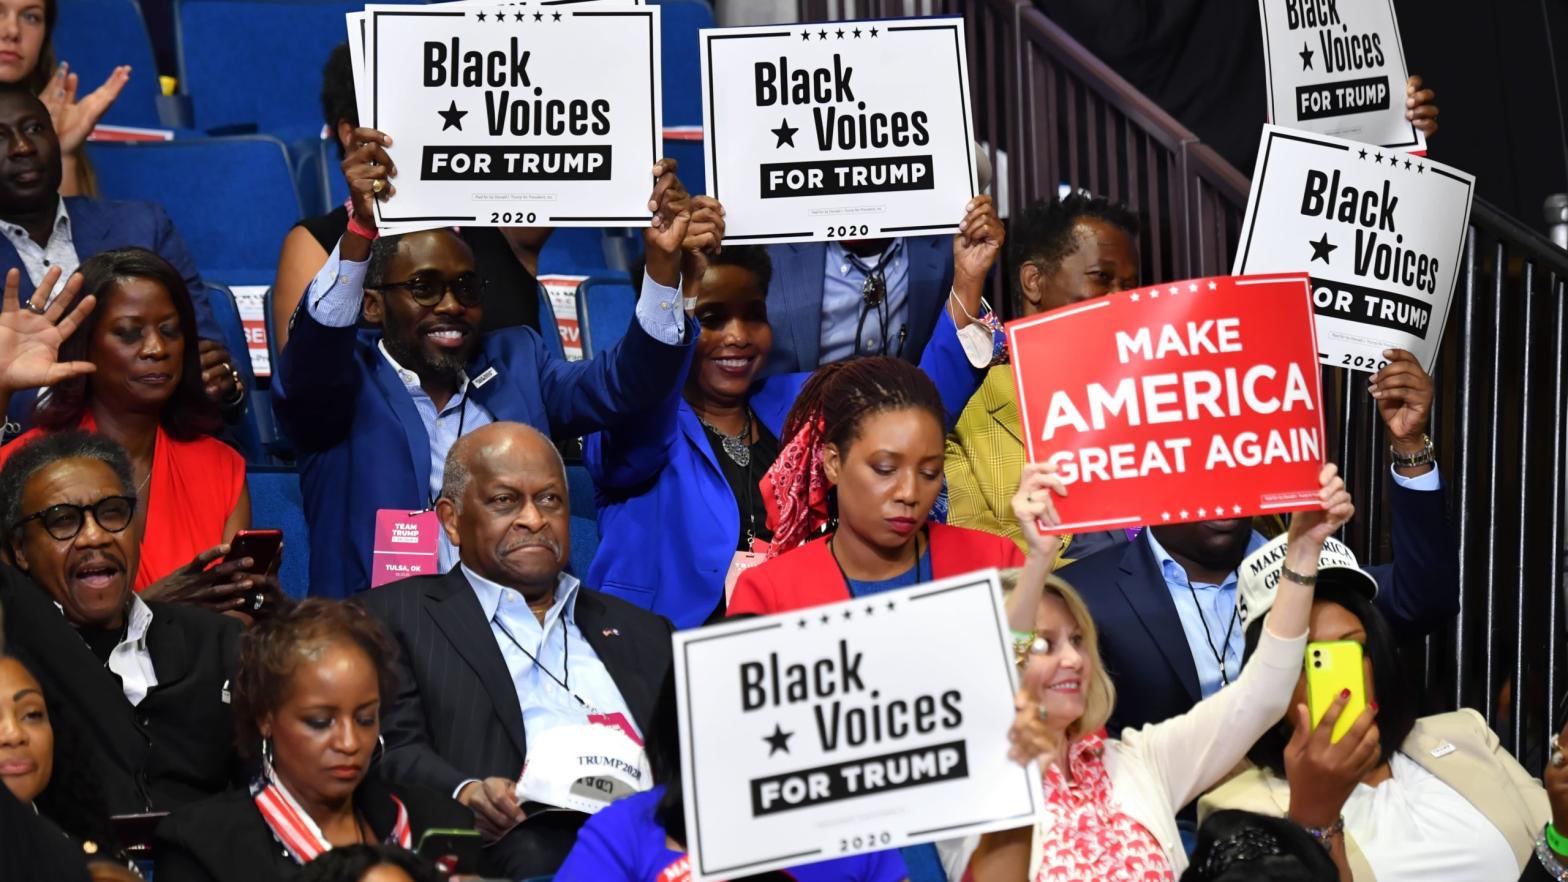 Herman Cain (centre) attends a rally for President Donald Trump at the BOK Centre on June 20, 2020 in Tulsa, Oklahoma. (Photo: Nicholas Kamm, Getty Images)